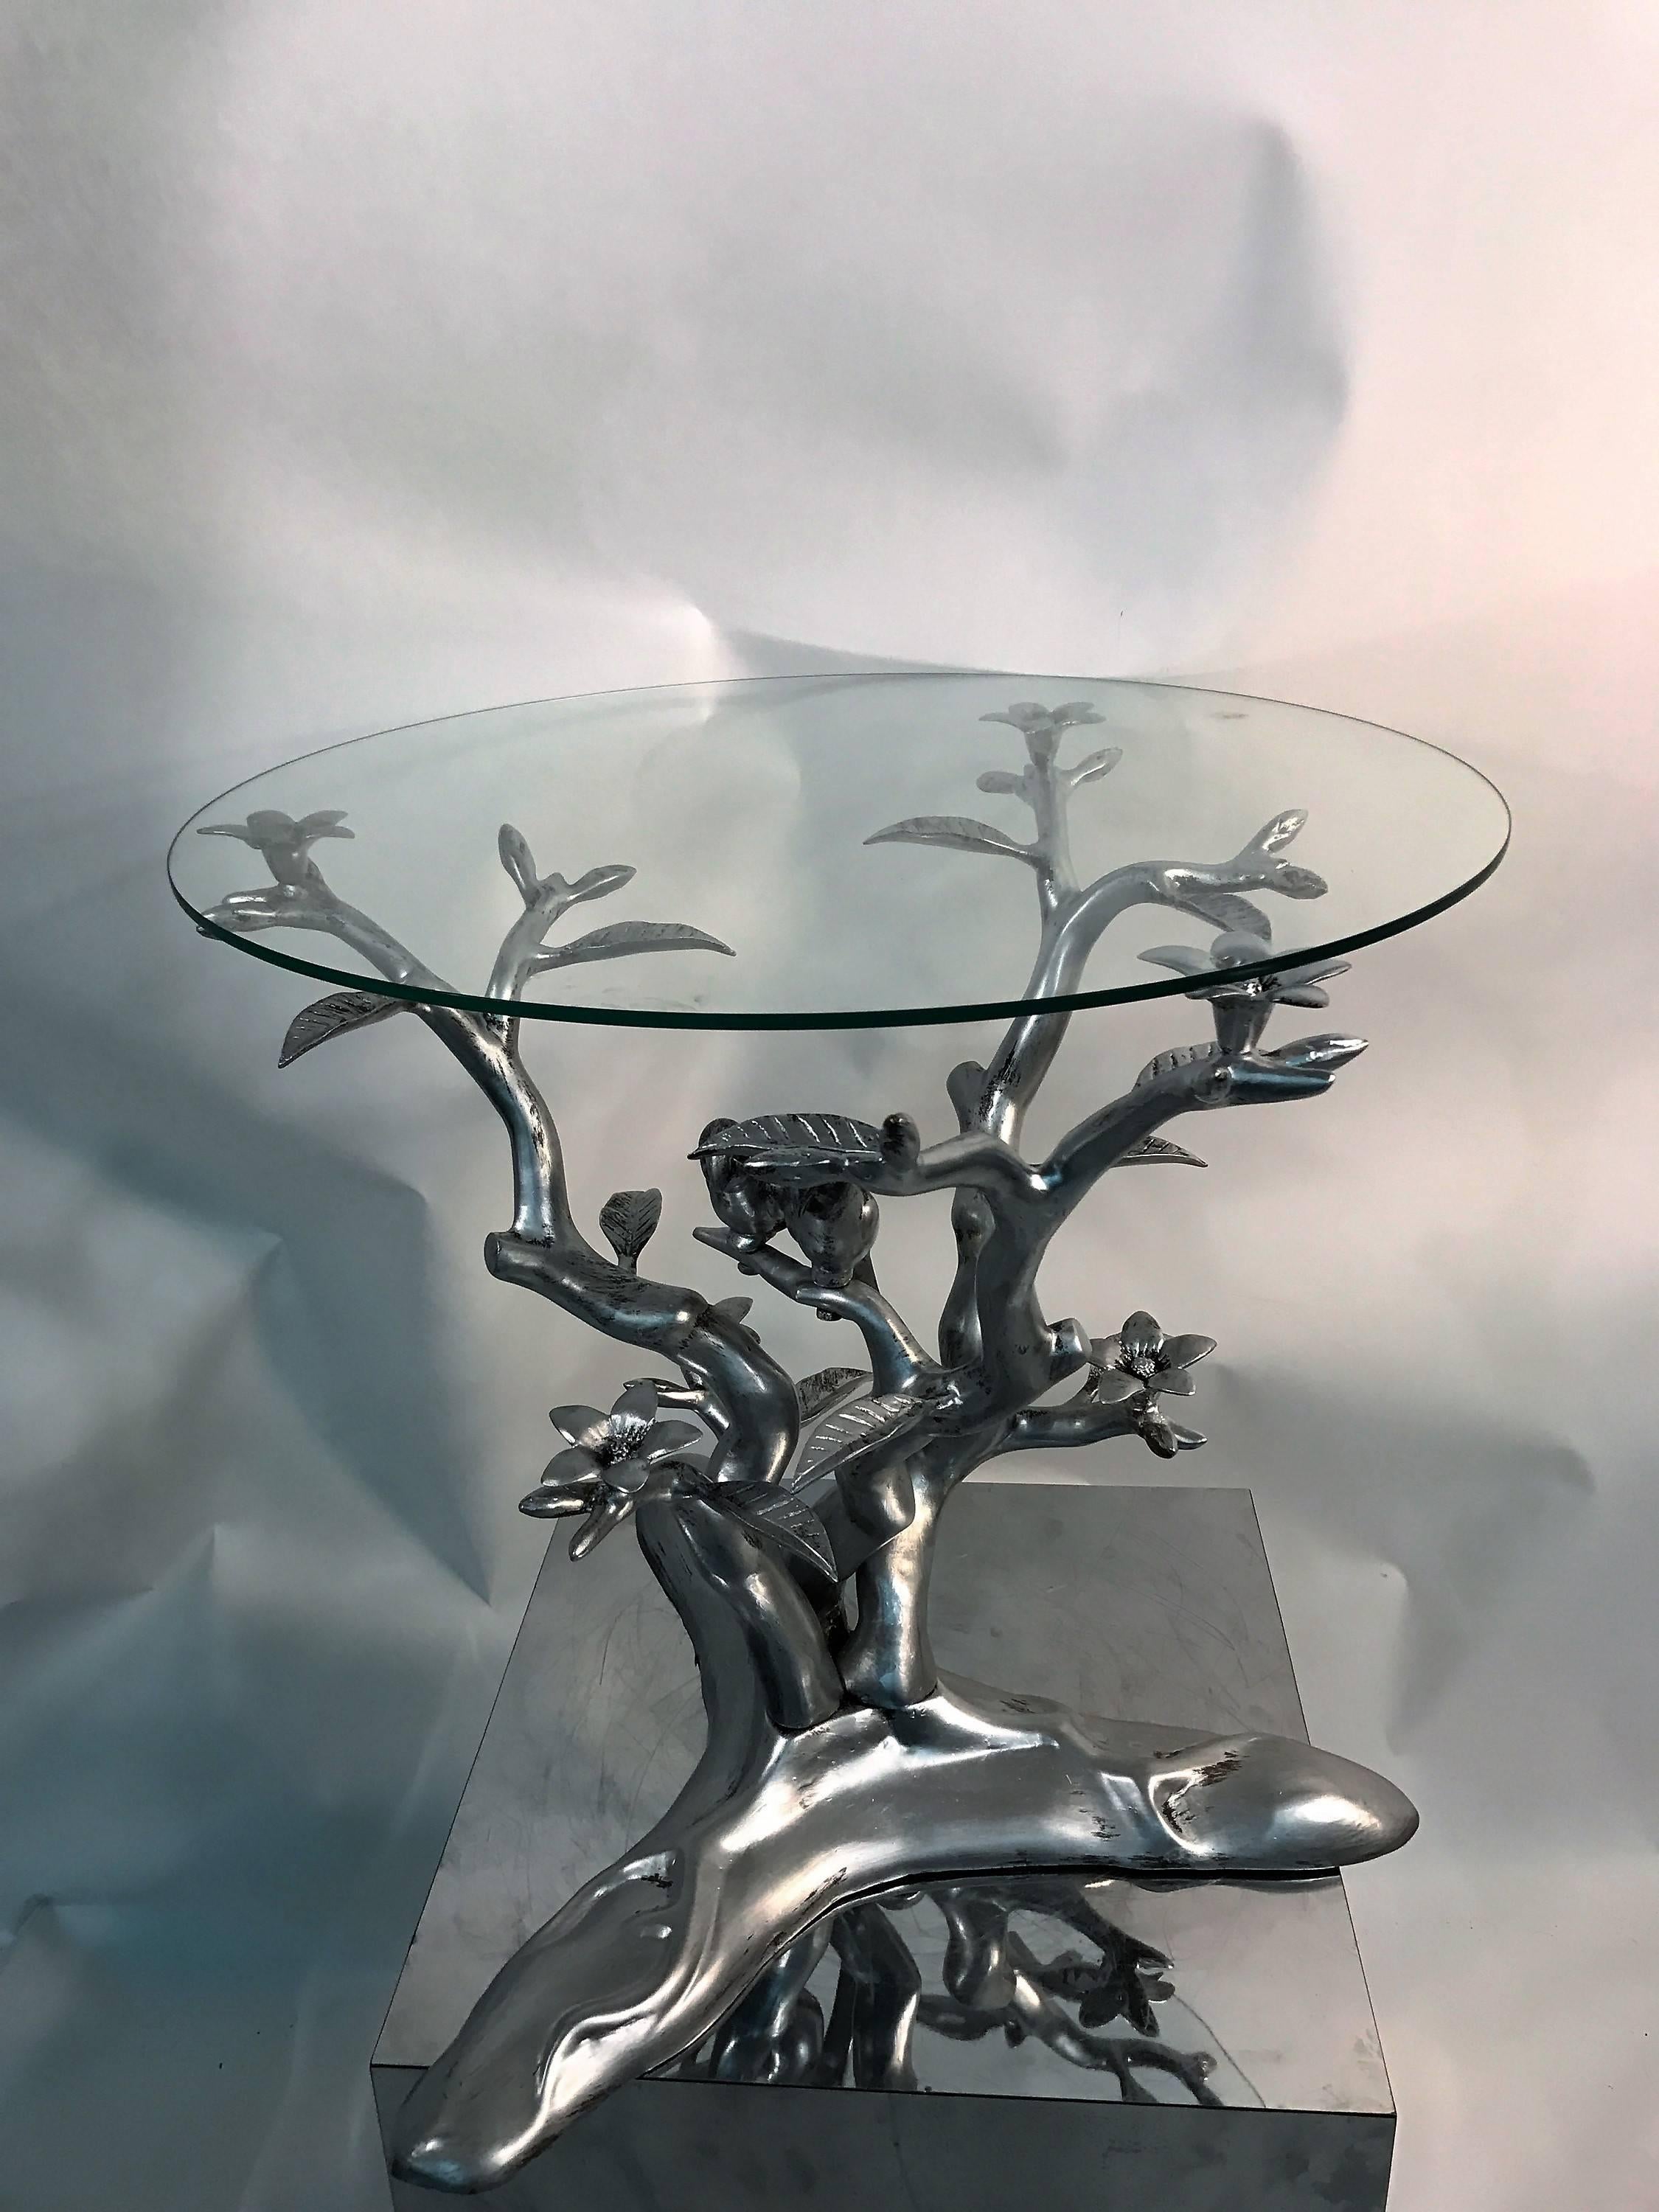 Silvered enameled bronze abstract flowering tree table with pair of parrots upon the branches. Great Modernist style of Giacometti Brothers Foliage and Animalier tables.